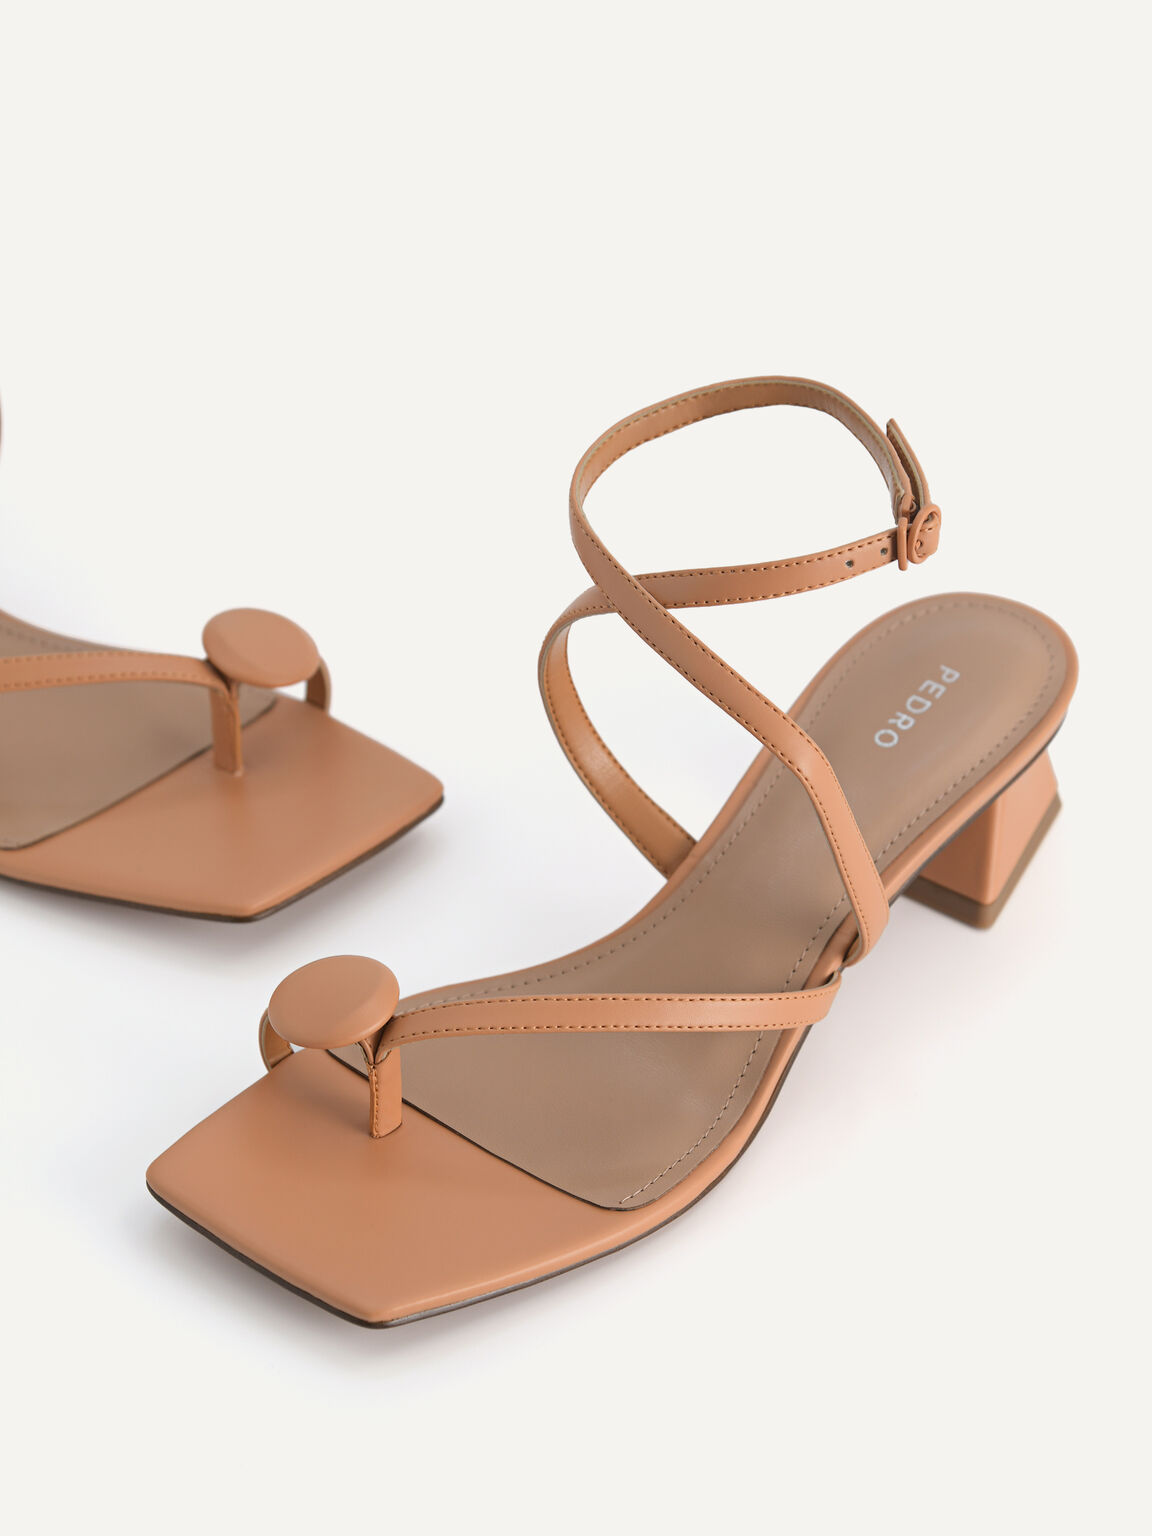 Strappy Toe-Loop Heeled Sandals, Camel